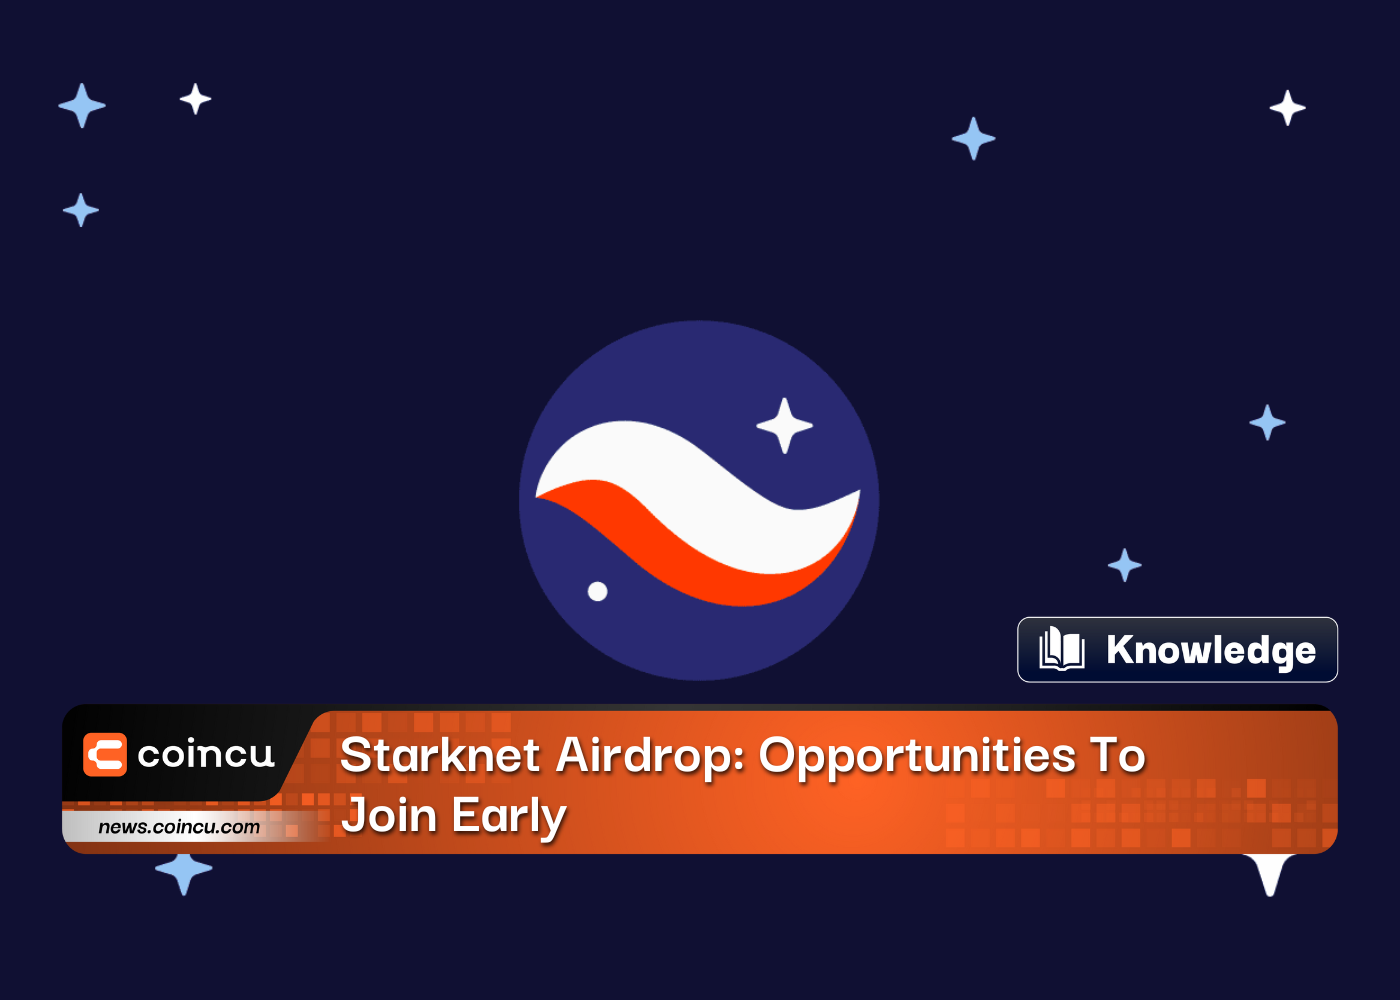 Starknet Airdrop: Opportunities To Join Early